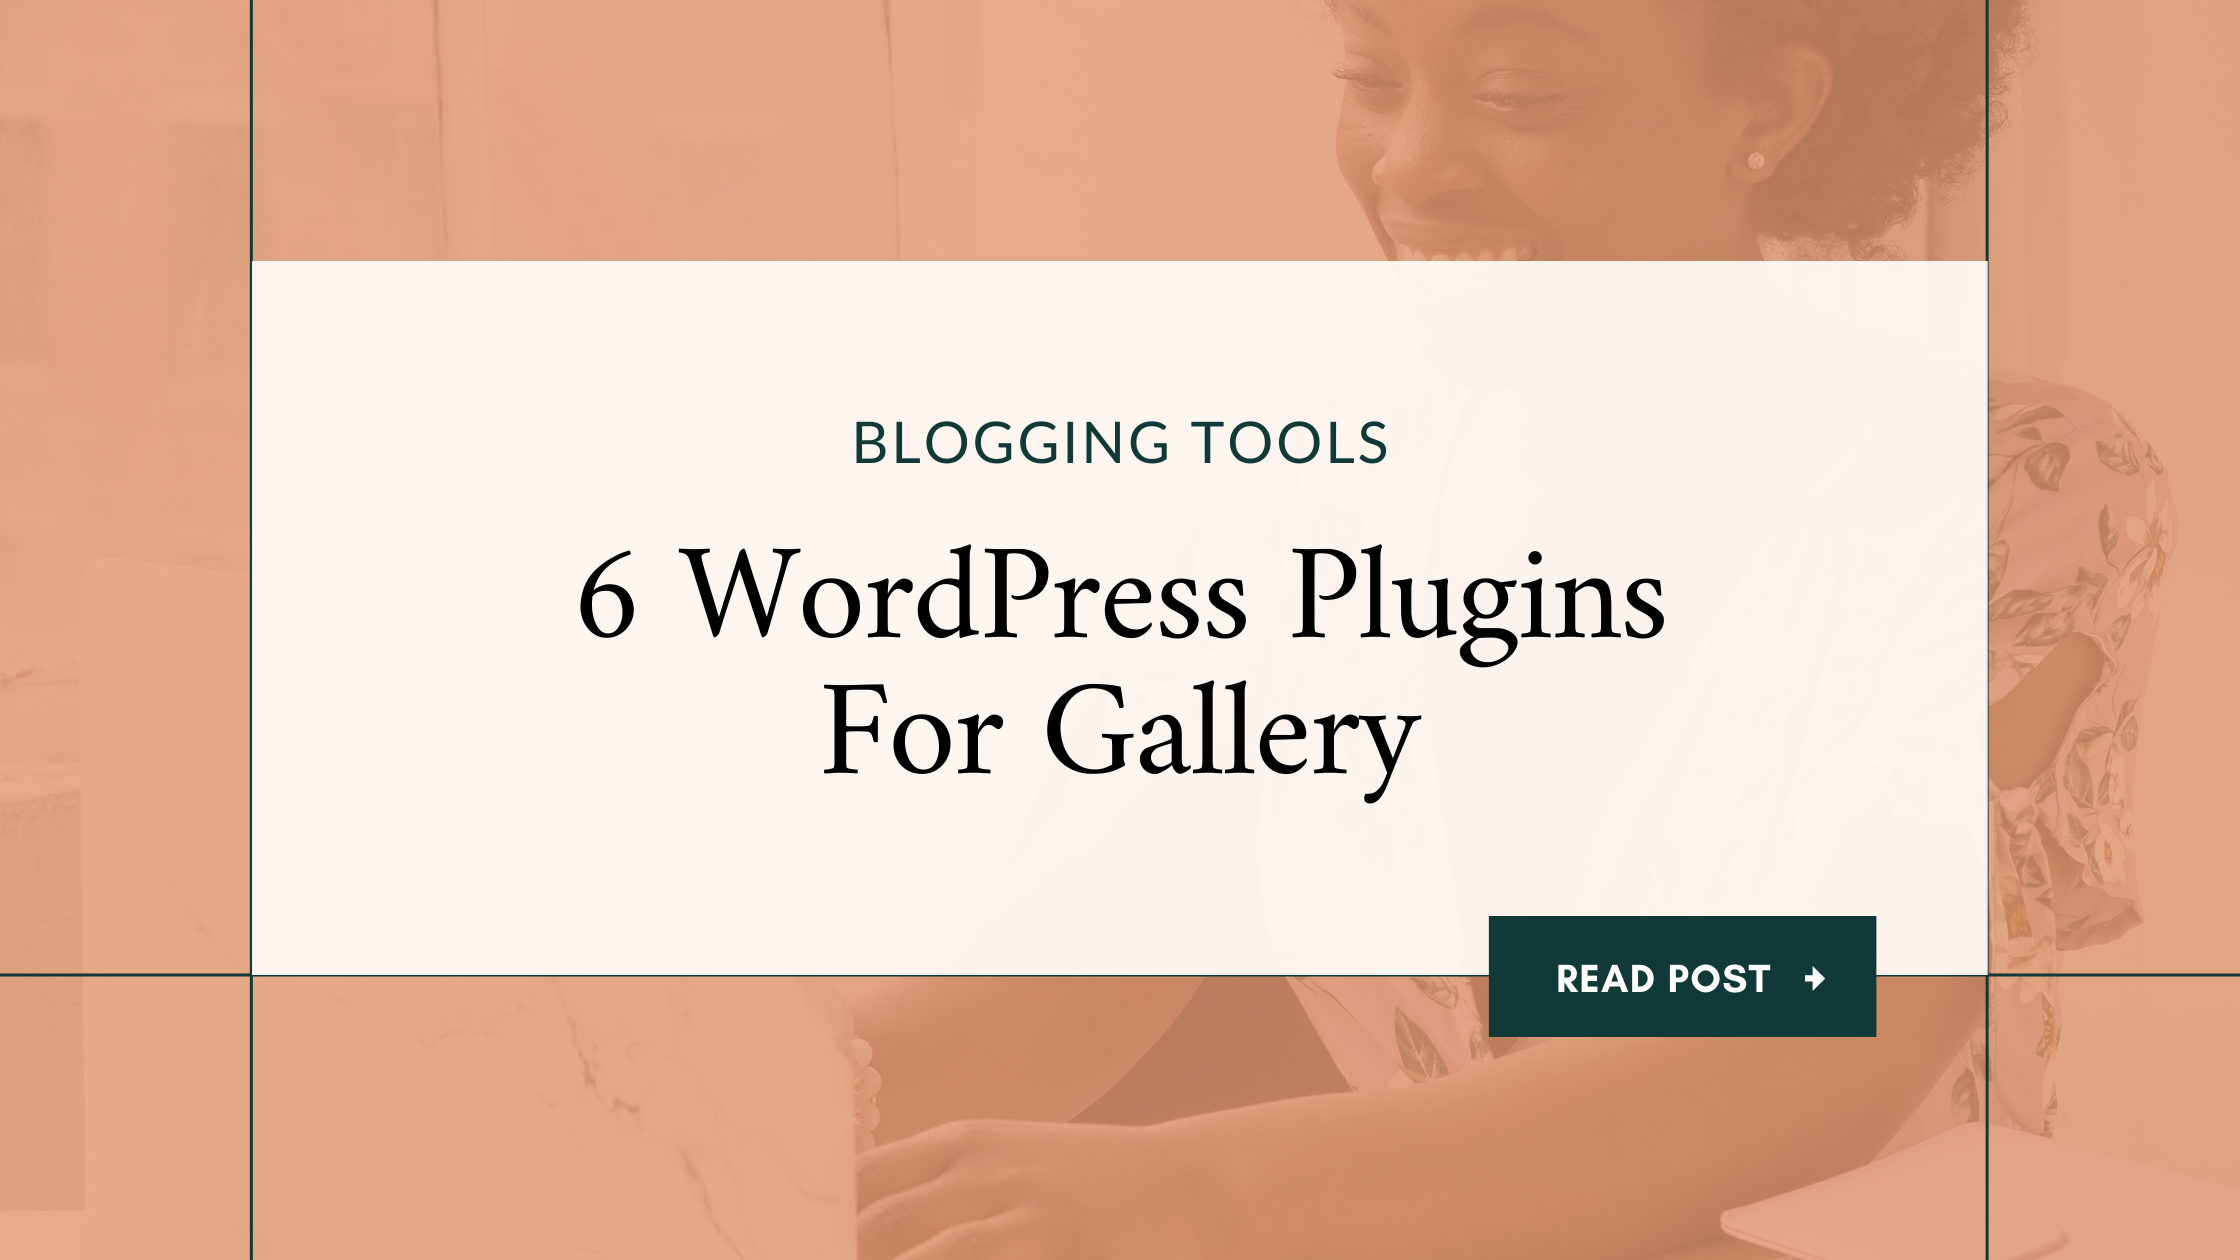 6 WordPress Plugins For Gallery That Will Take Your Site To The Next Level